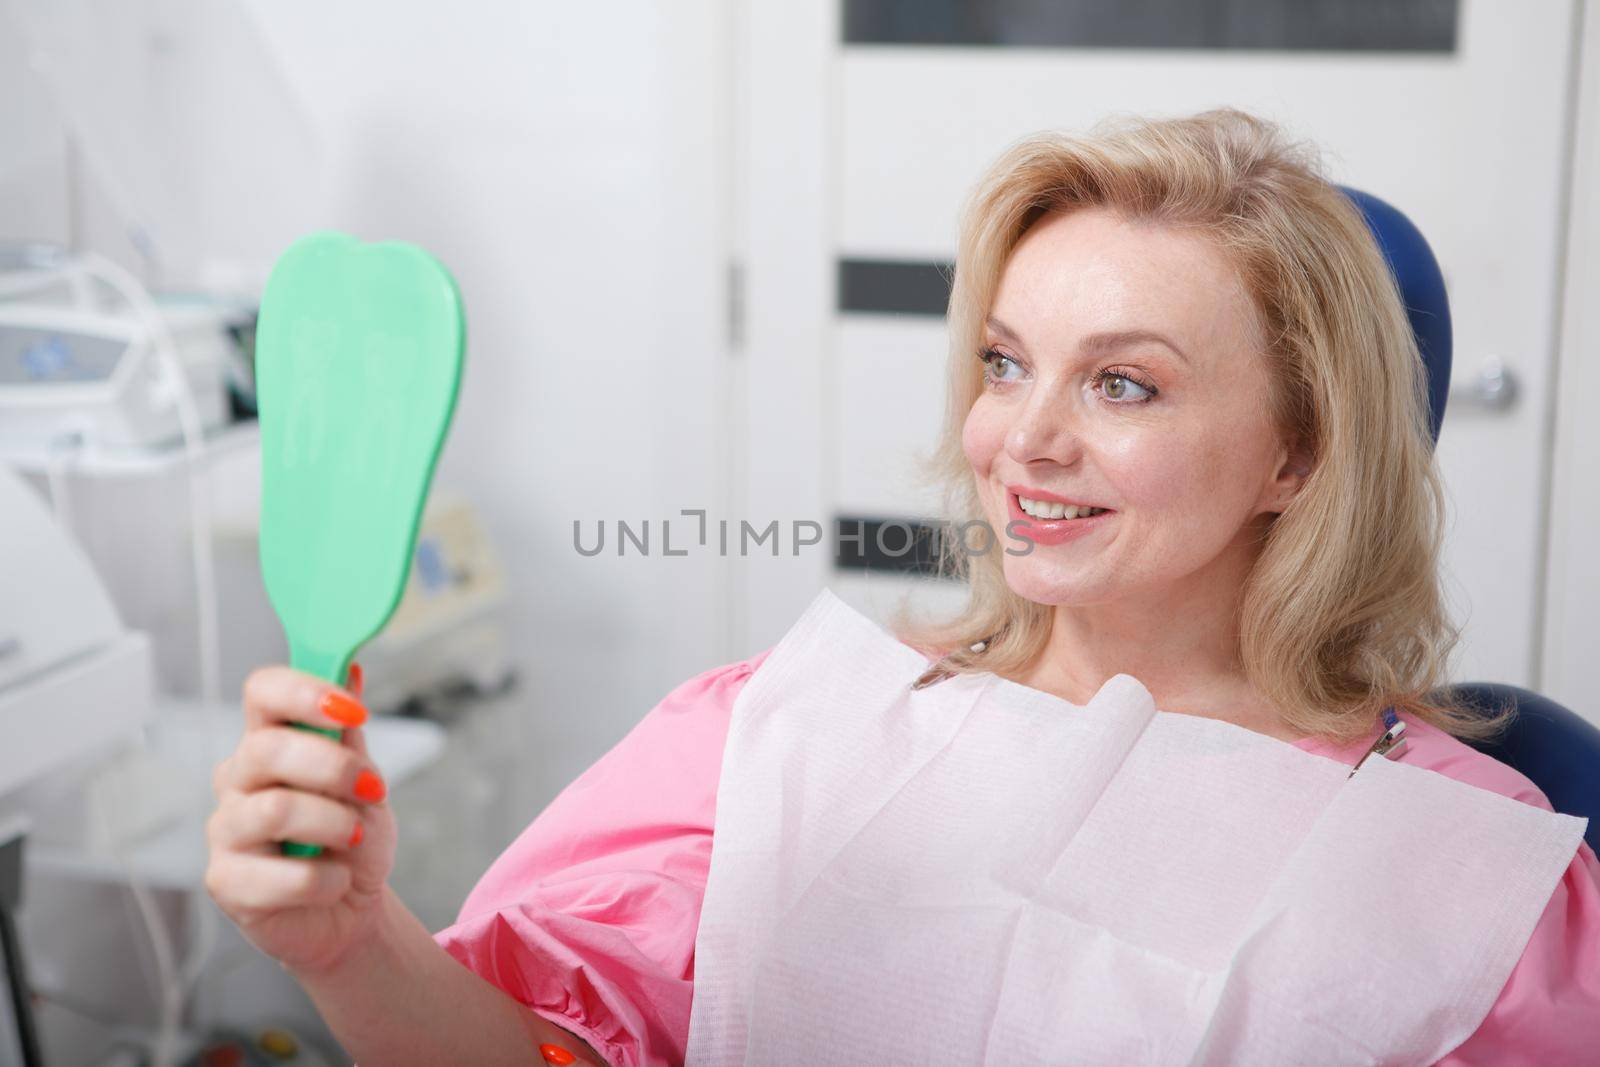 Cheerful mature woman smiling to the mirror she is holding, checking teeth after dental treatment